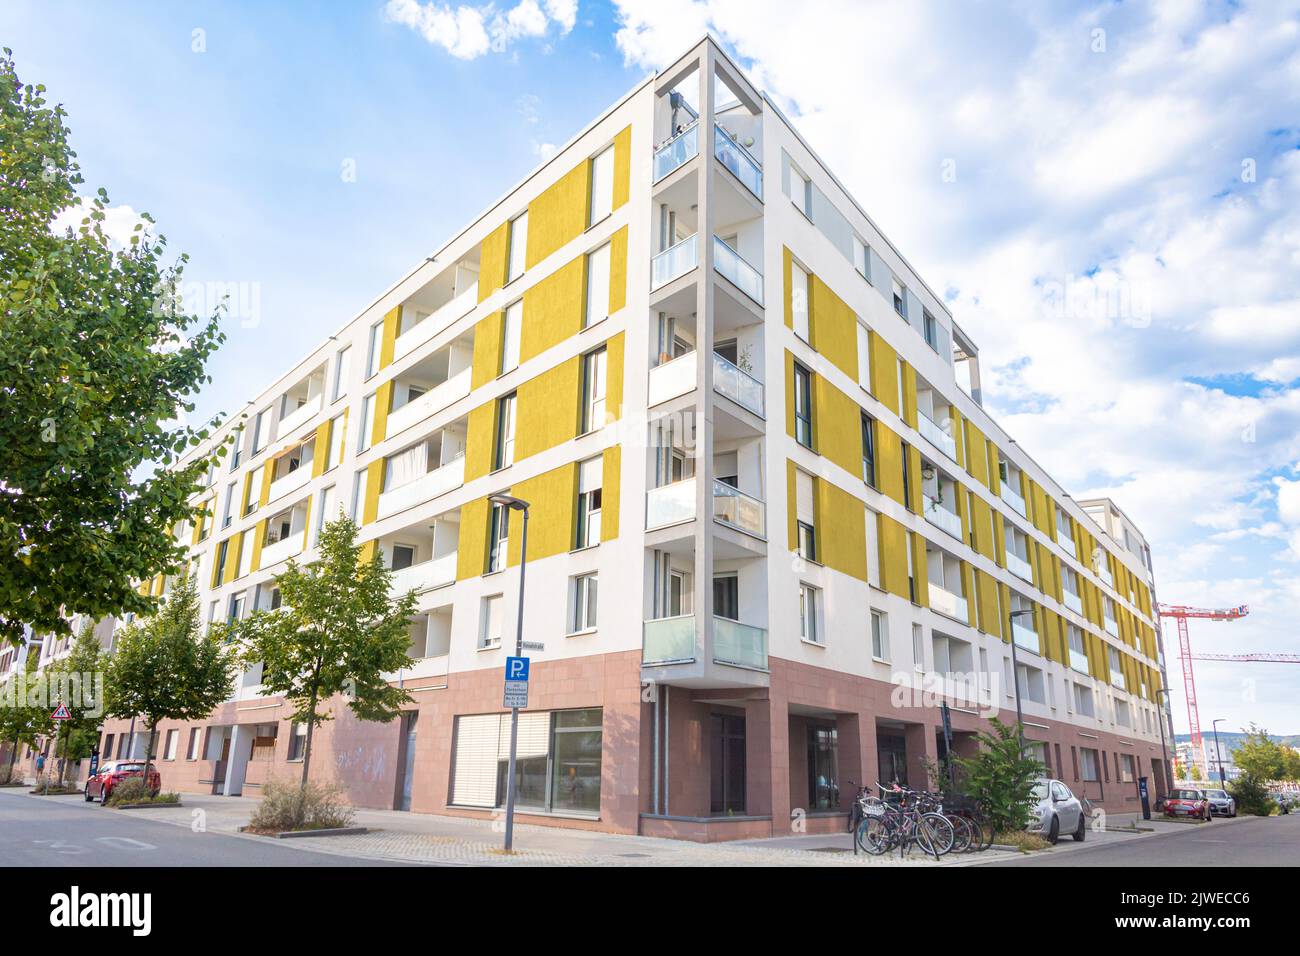 Heidelberg, Germany: September 12, 2022: Living environment with modern housing in the Bahnstadt, a Passive house development area in Heidelberg, Germ Stock Photo